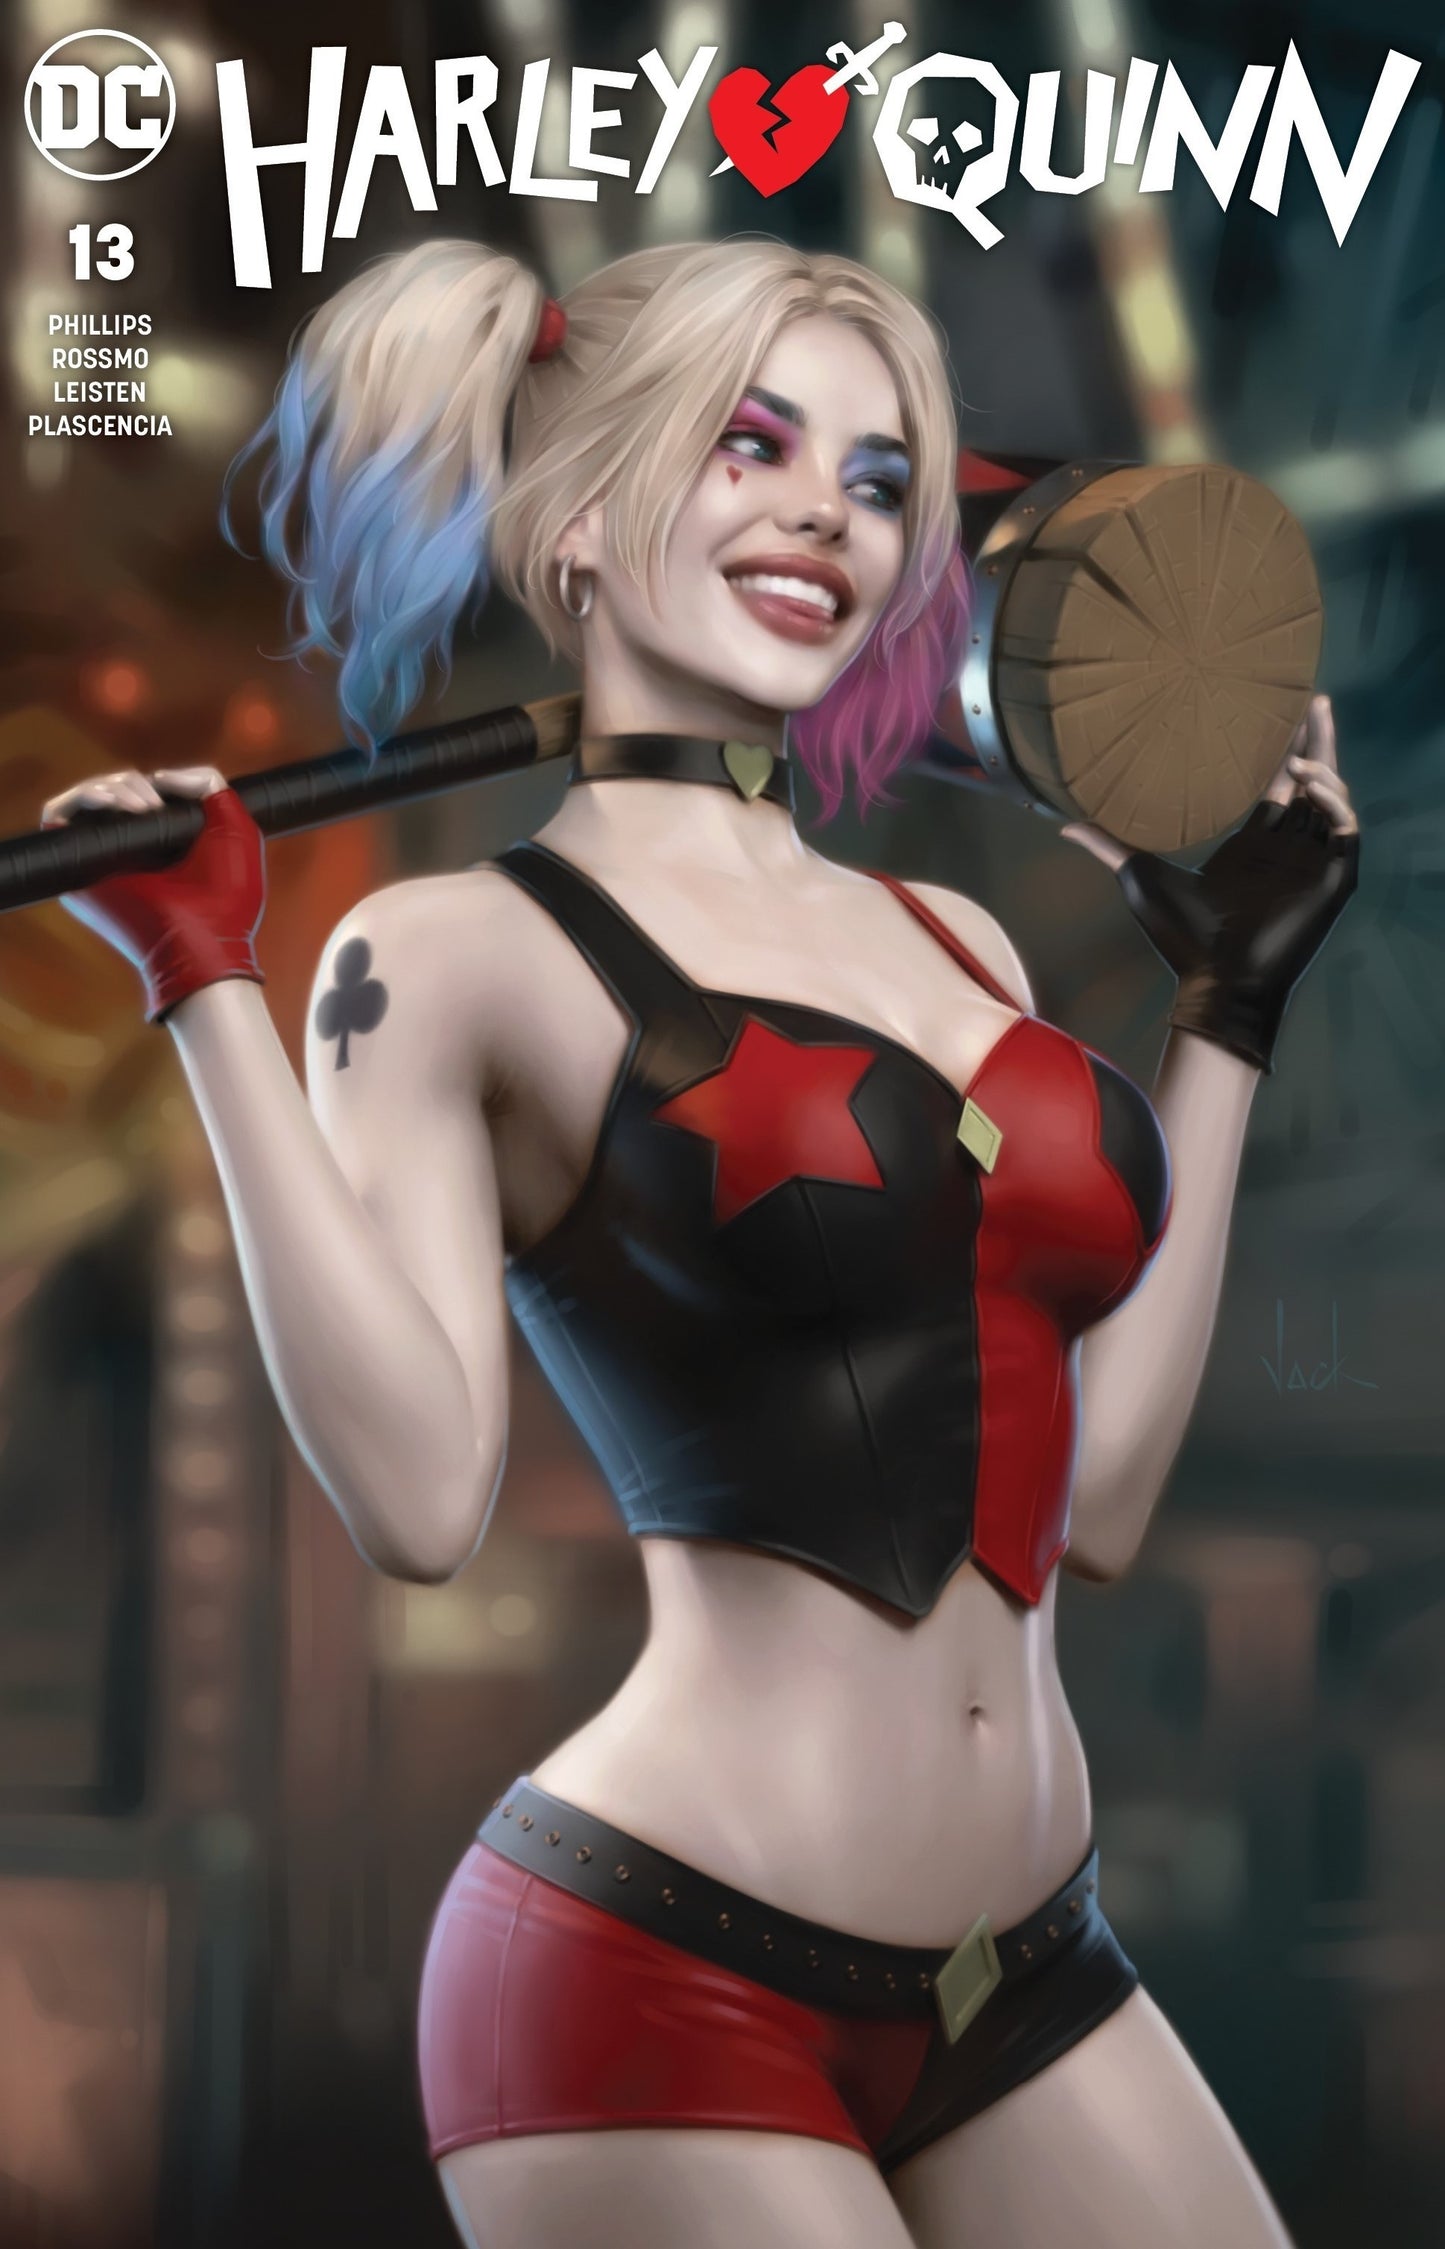 HARLEY QUINN #13 WILL JACK TRADE DRESS VARIANT LIMITED TO 3000